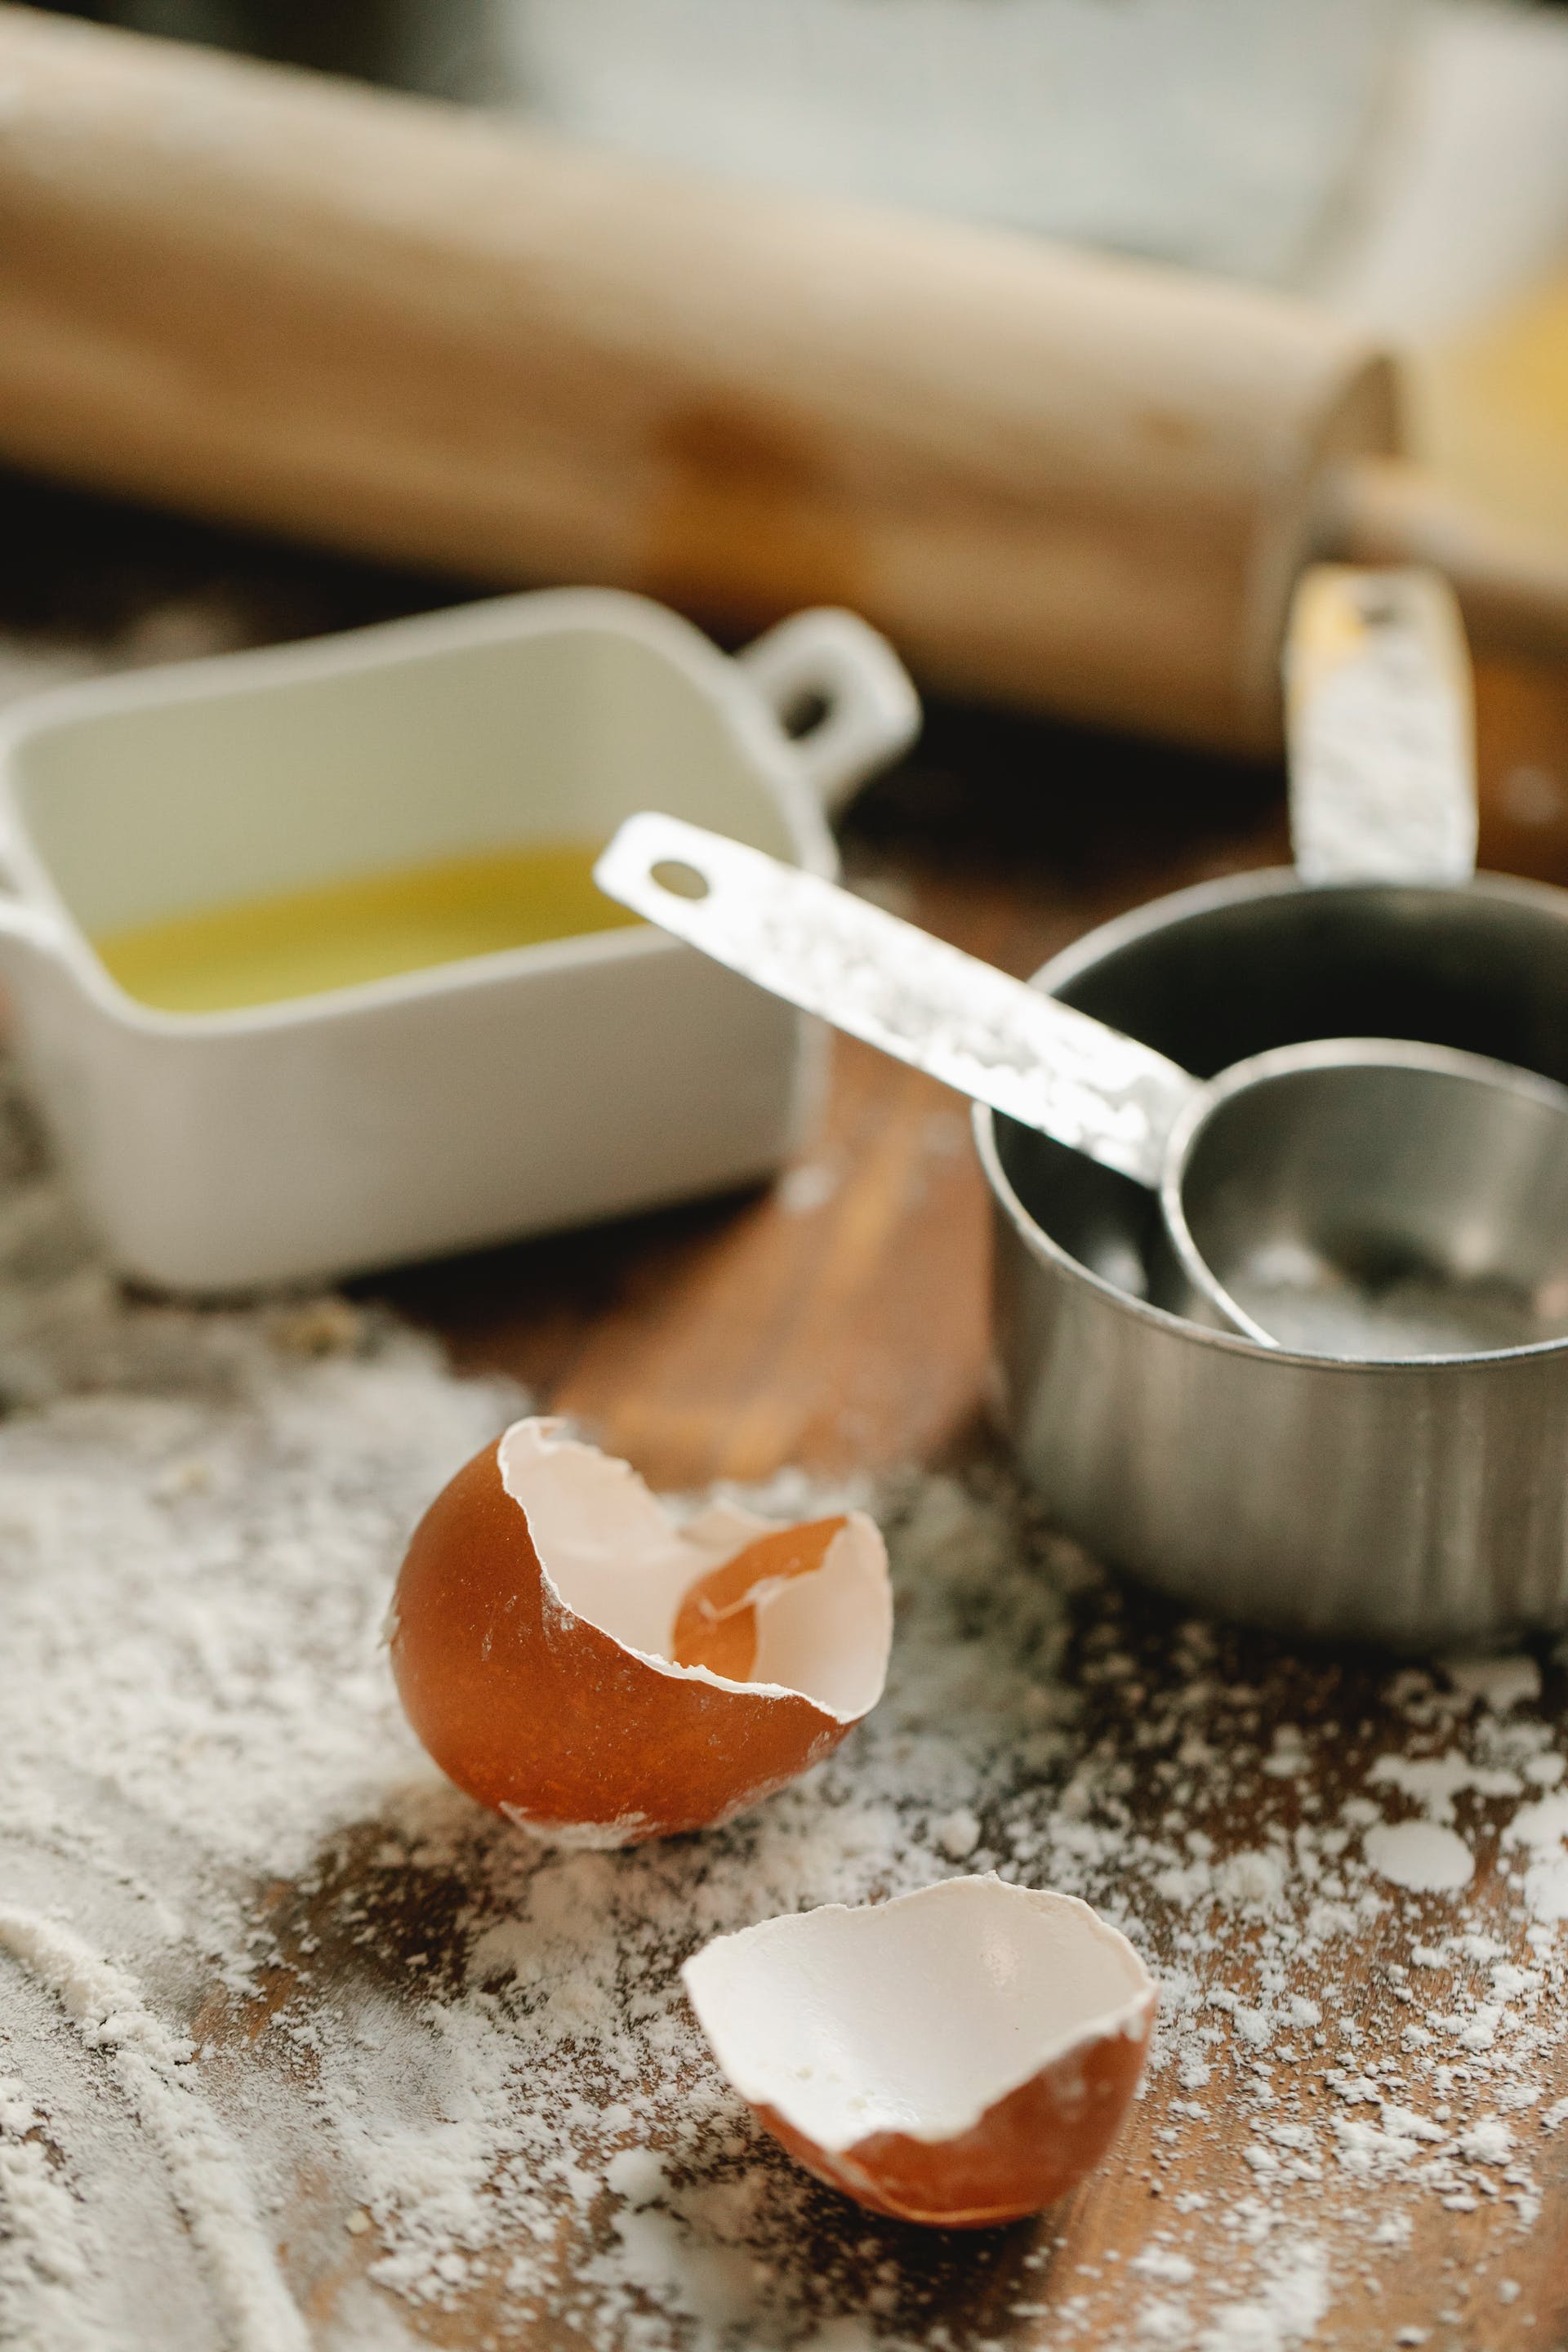 Eggshells and flour on a wooden surface | Source: Pexels